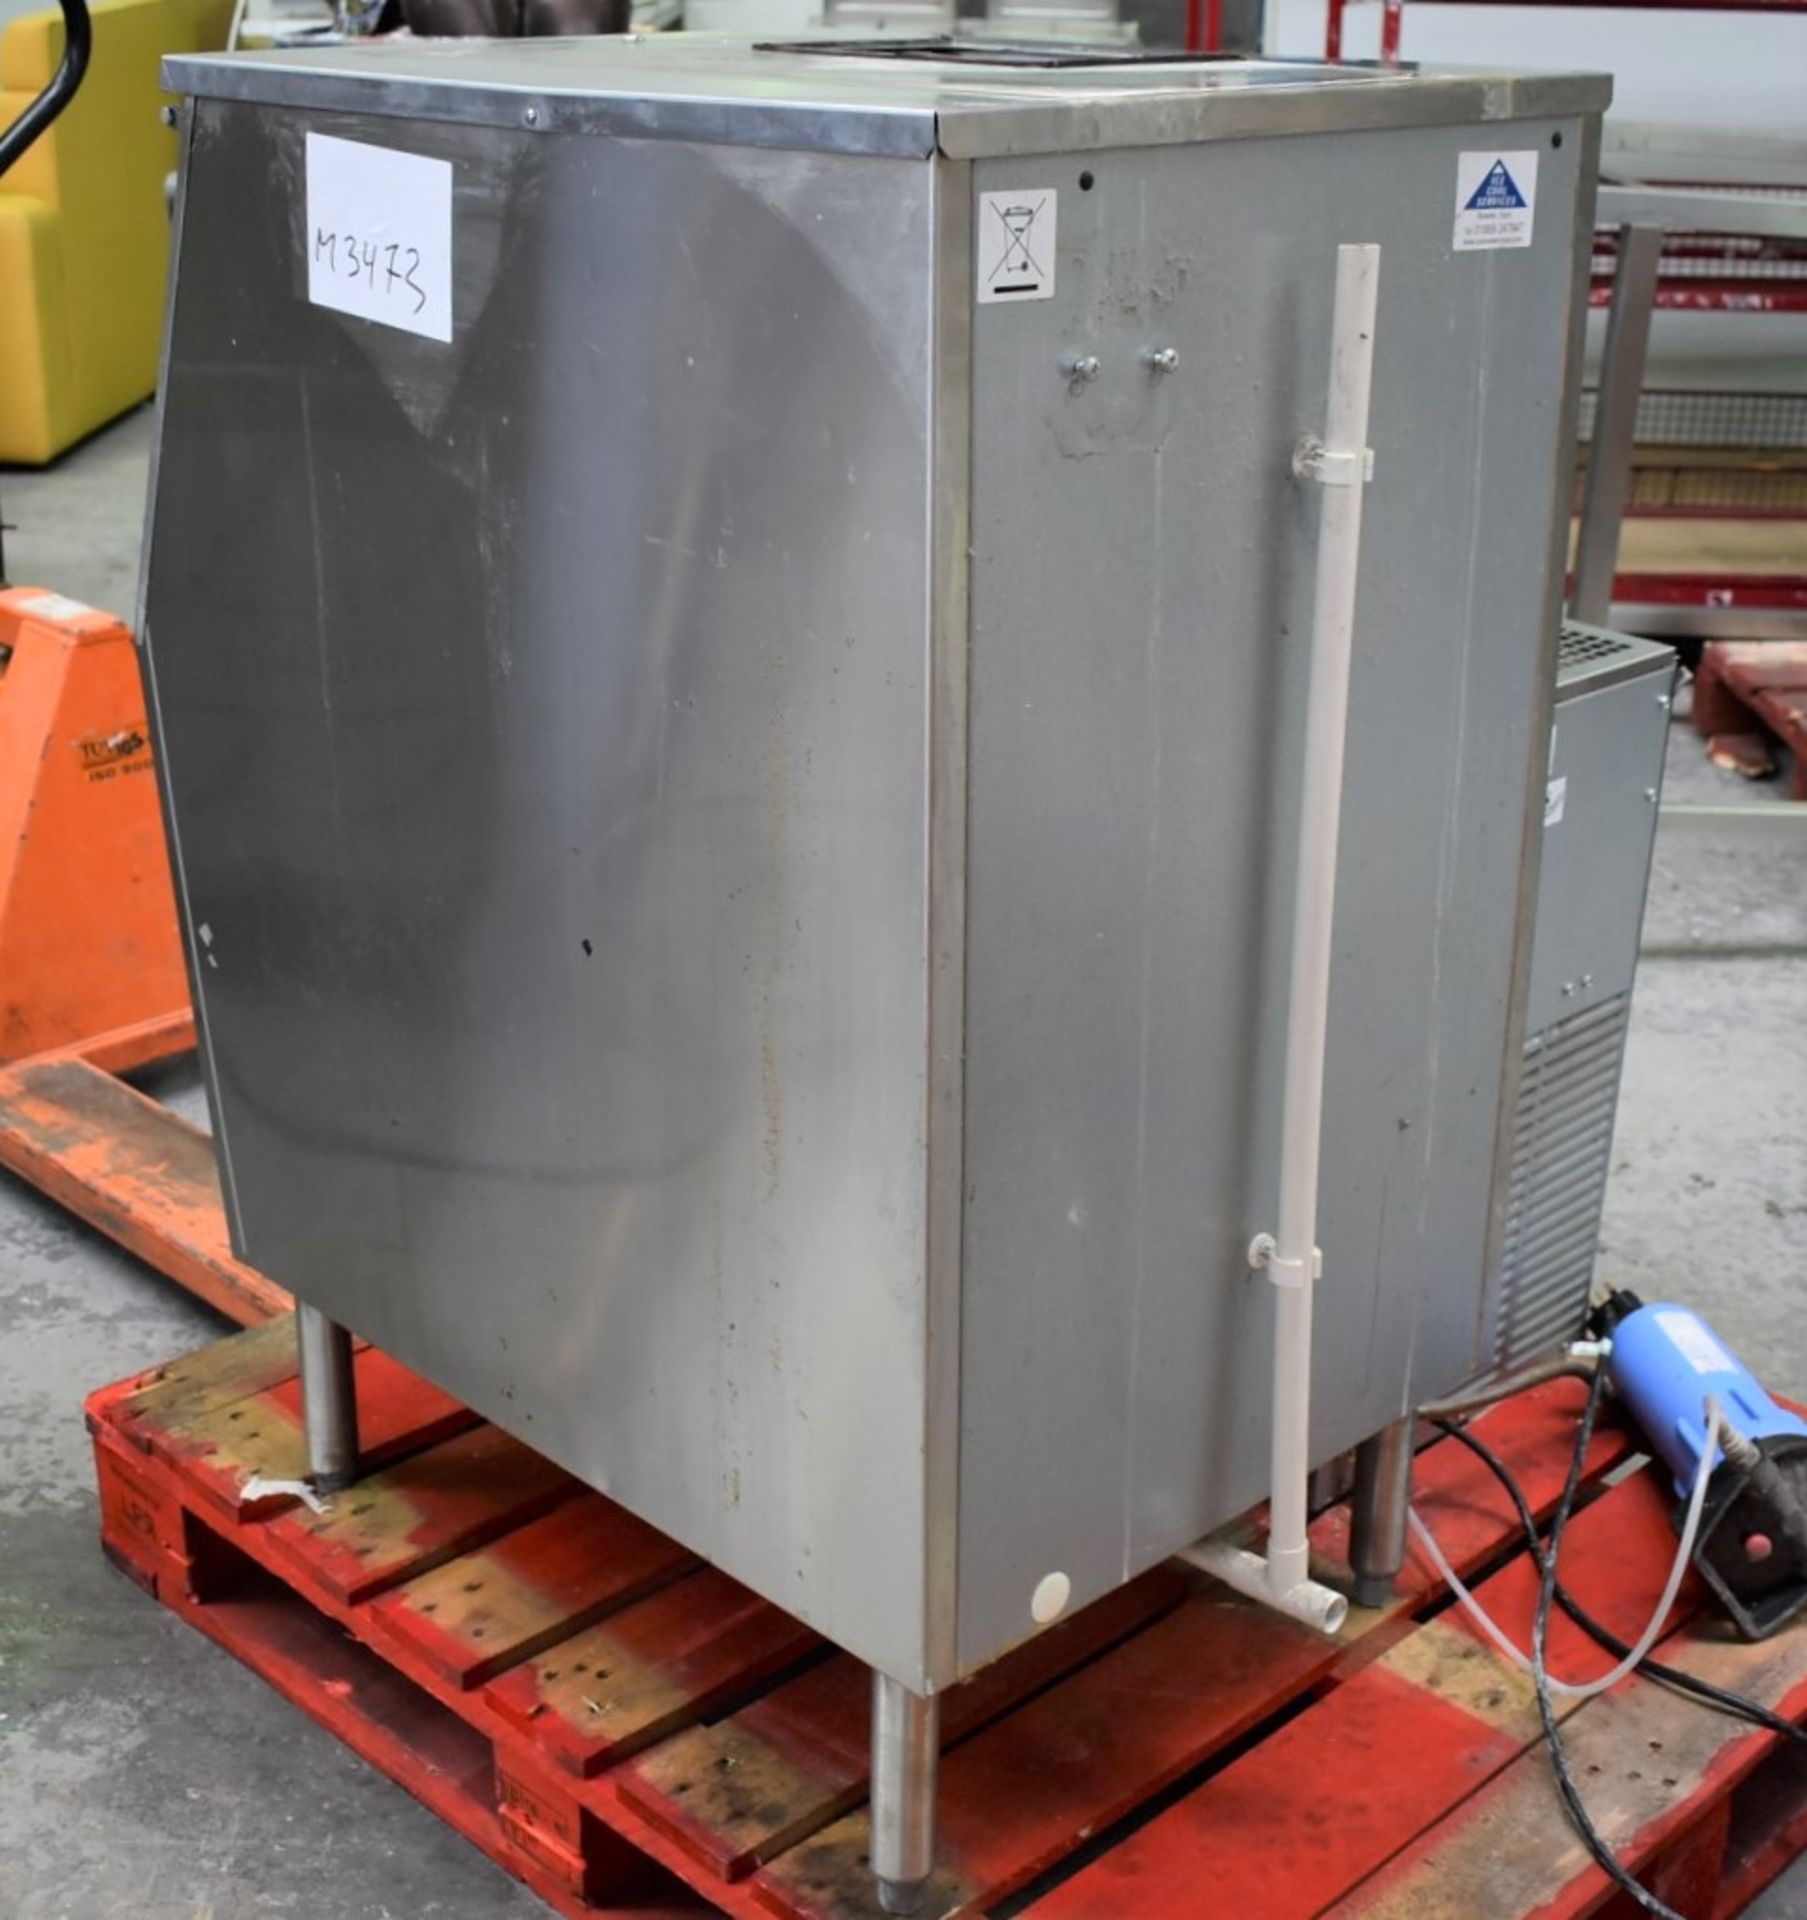 1 x Follet Commercial Ice Machine With WCF712 Flaker Head and Ice Storage Bin - 240v UK Plug - Image 3 of 10